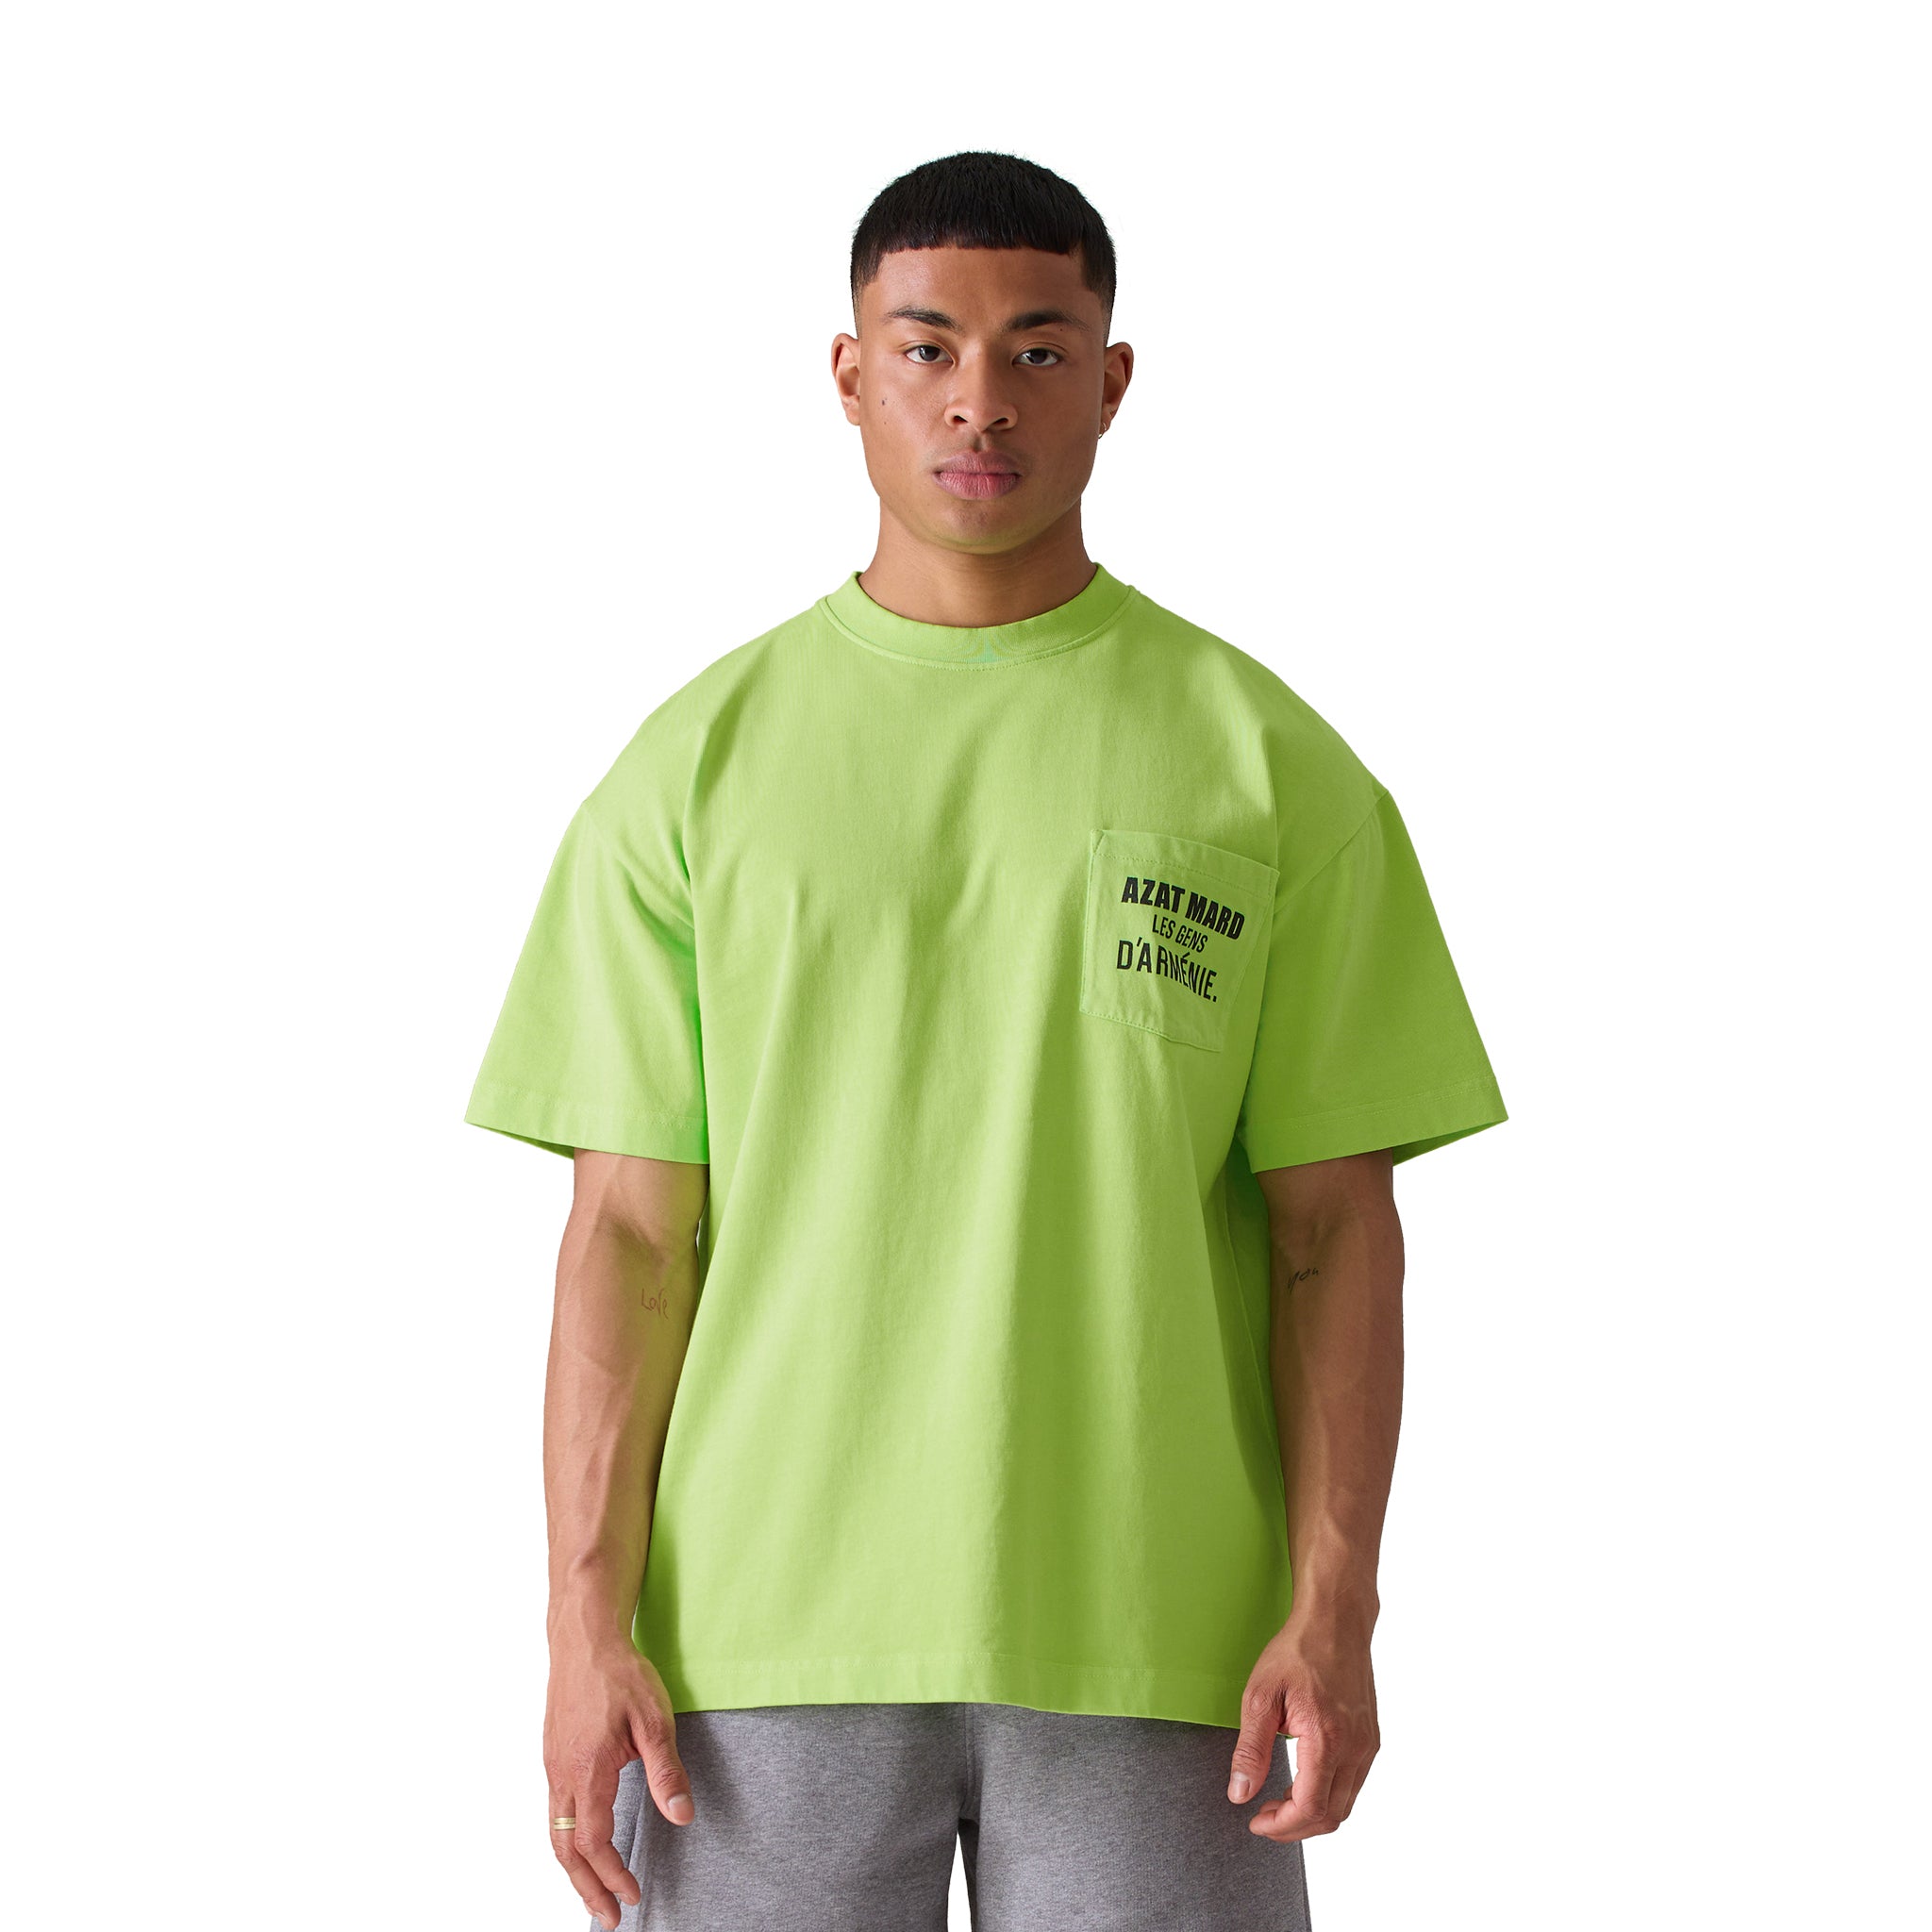 Model front view of Azat Mard Les Gens T Shirt Lime Green SS23090